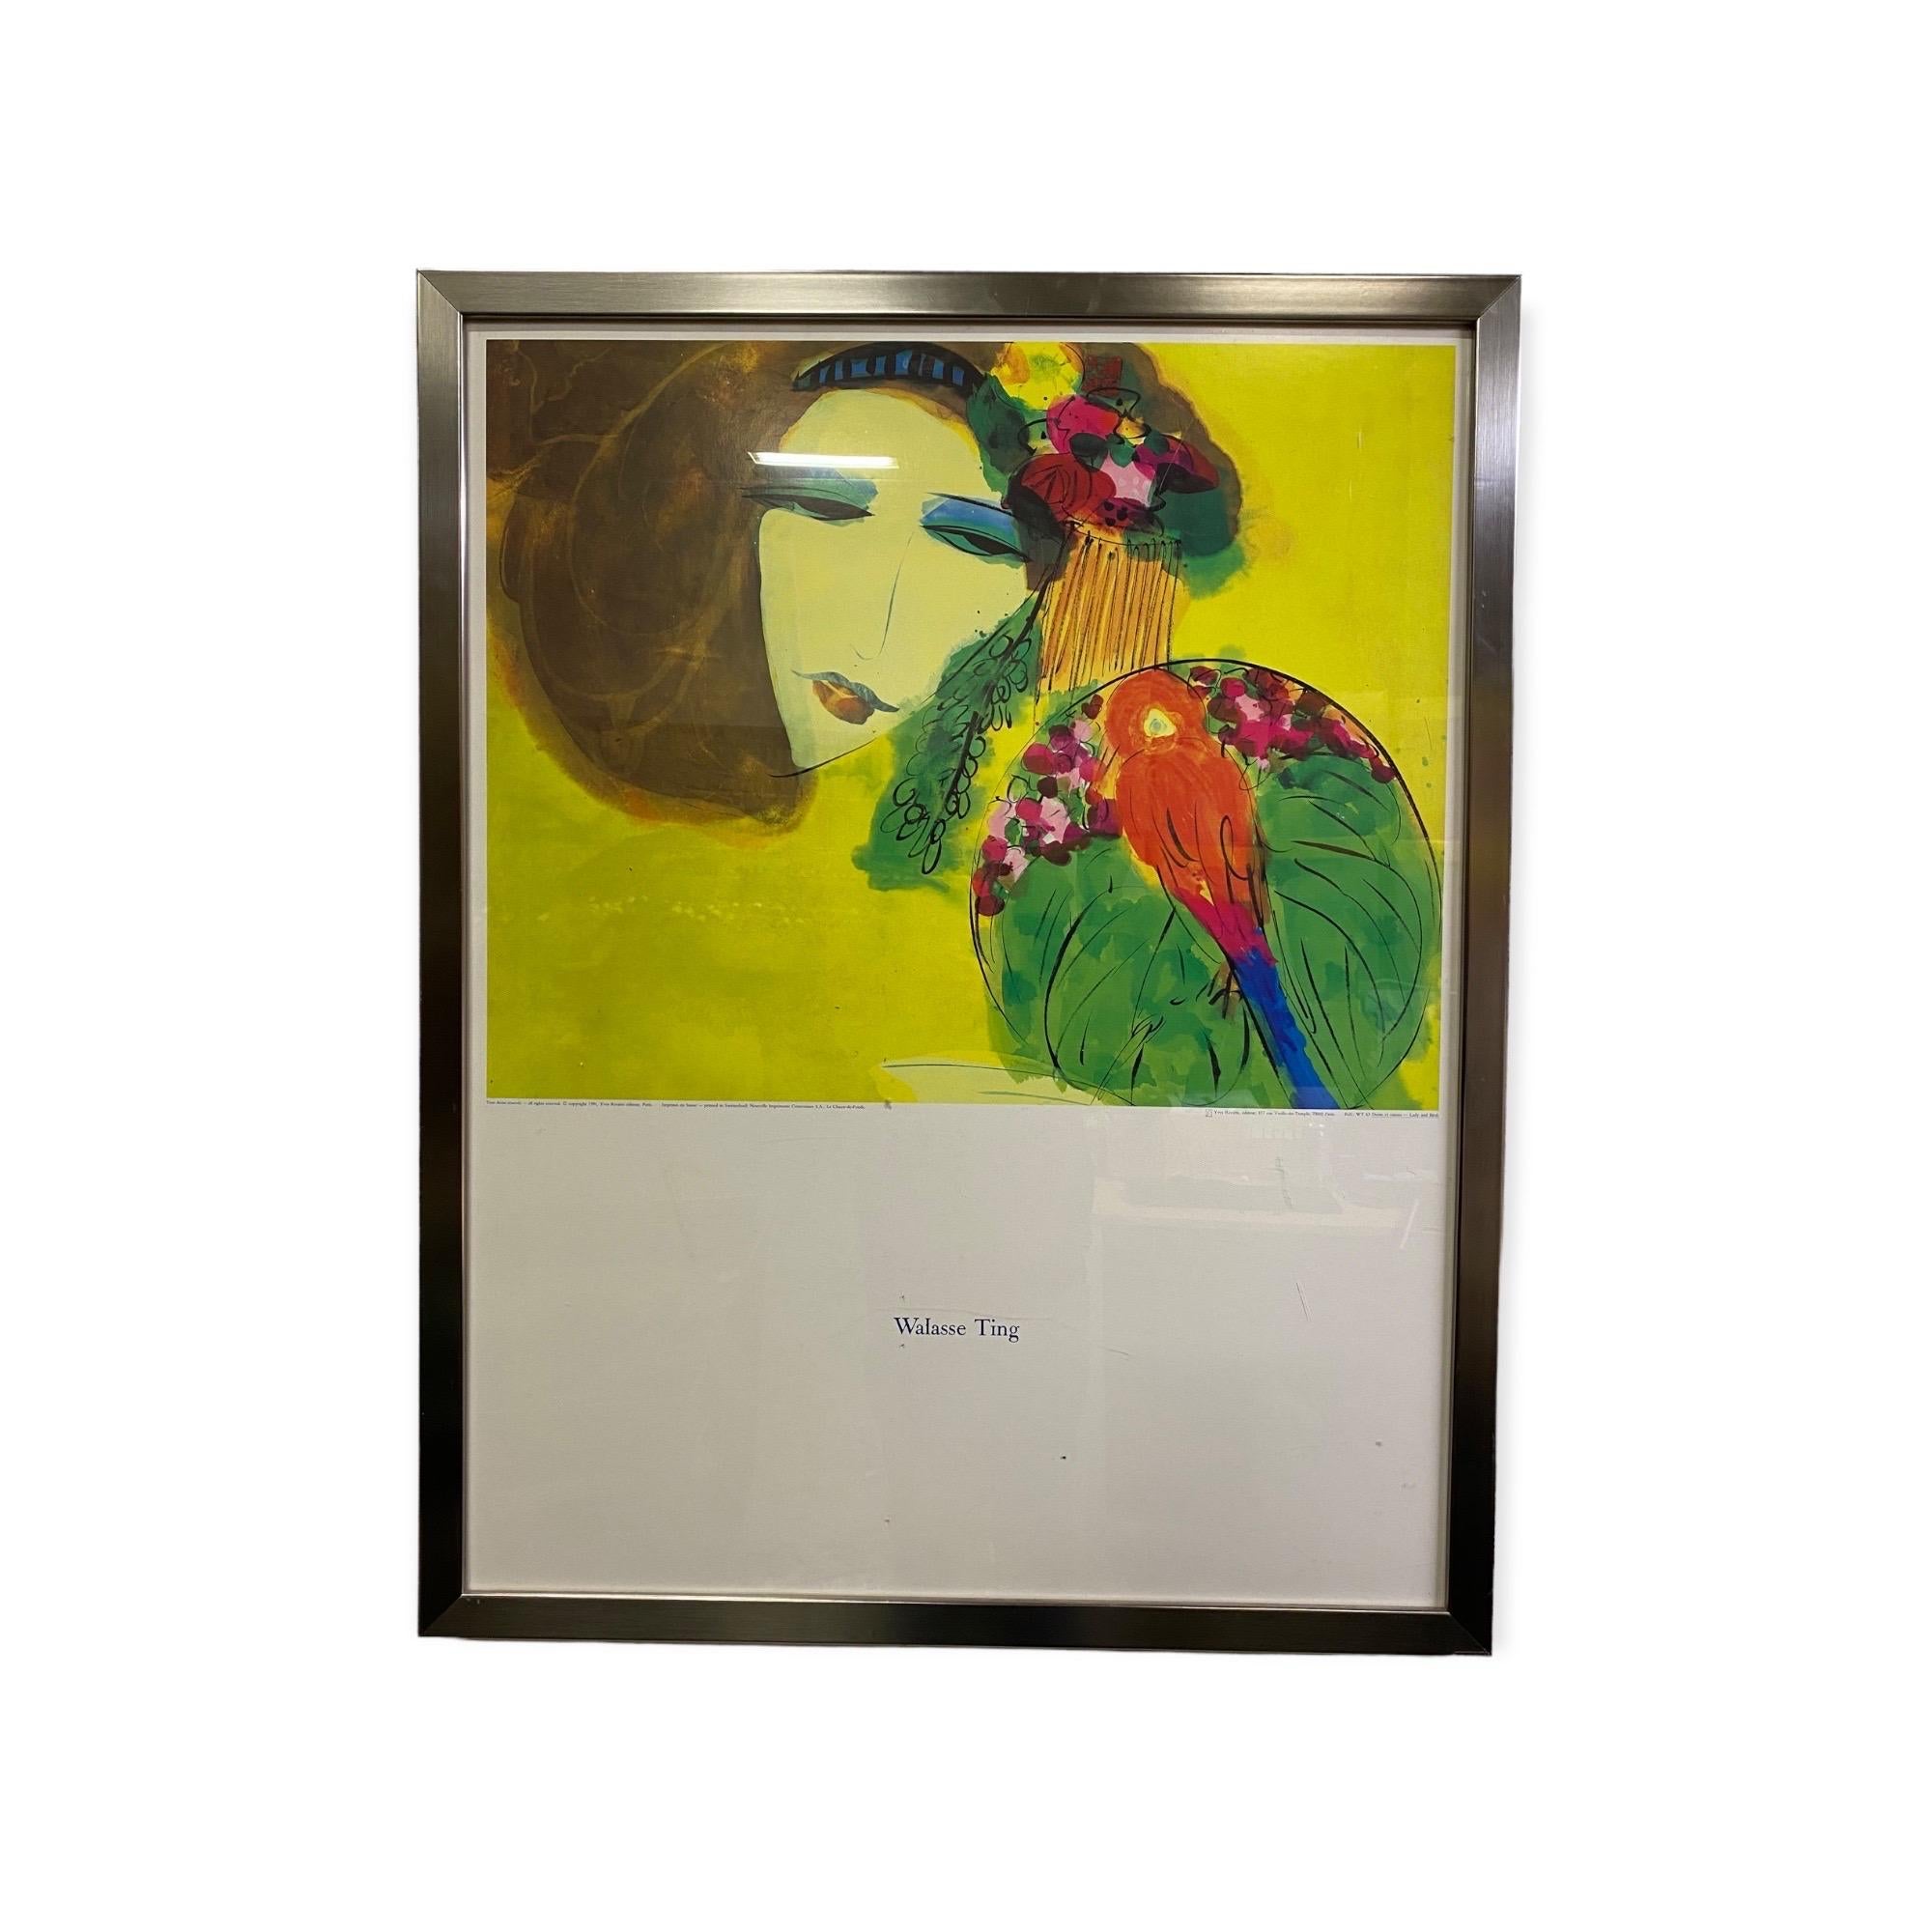 Beautiful framed print by Chinese American artist Walasse Ting after his work 